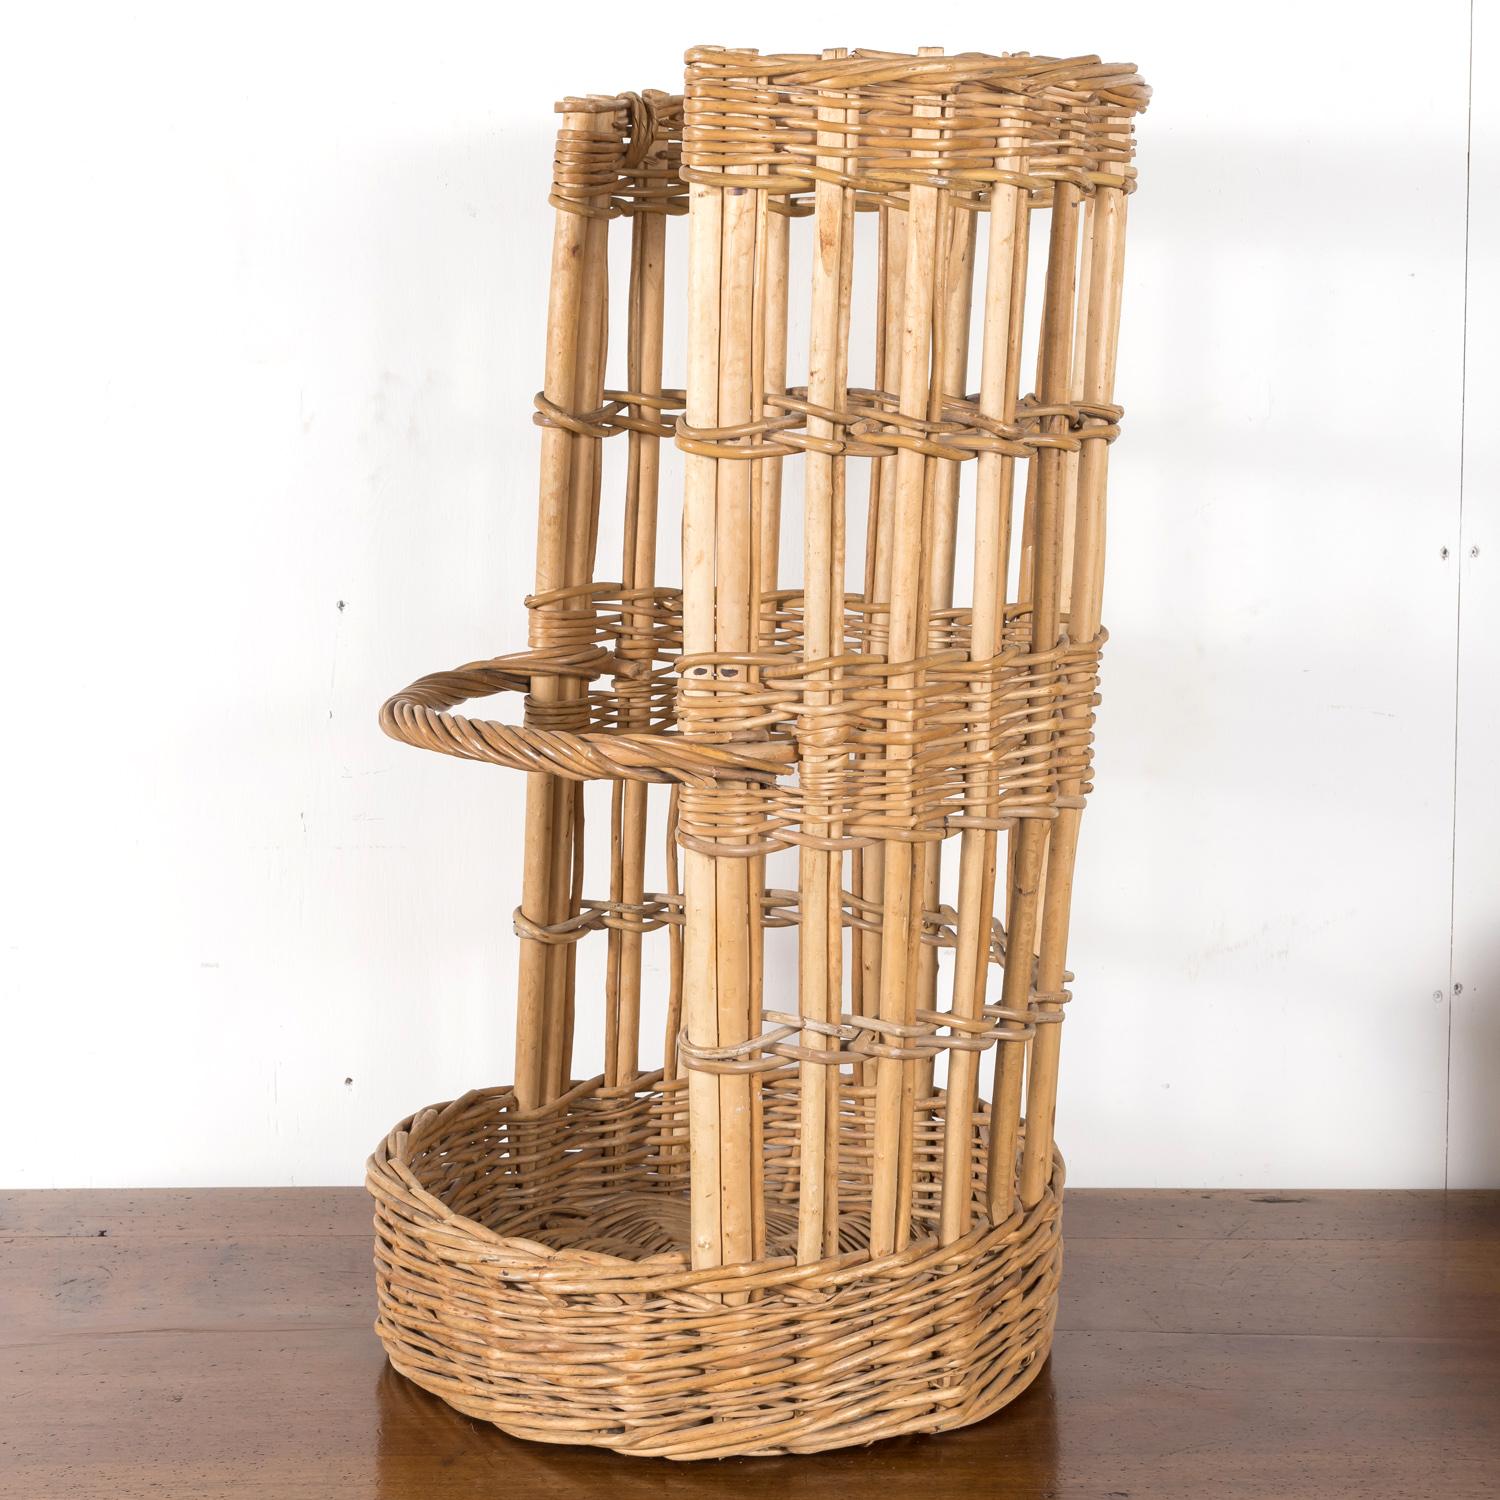 A hard to find open-sided 19th century French boulangerie baguette basket, circa early 1900s. This semi-circle willow basket with a lovely aged patina was used to showcase freshly baked baguettes in a French boulangerie. Wooden slat bottom runners